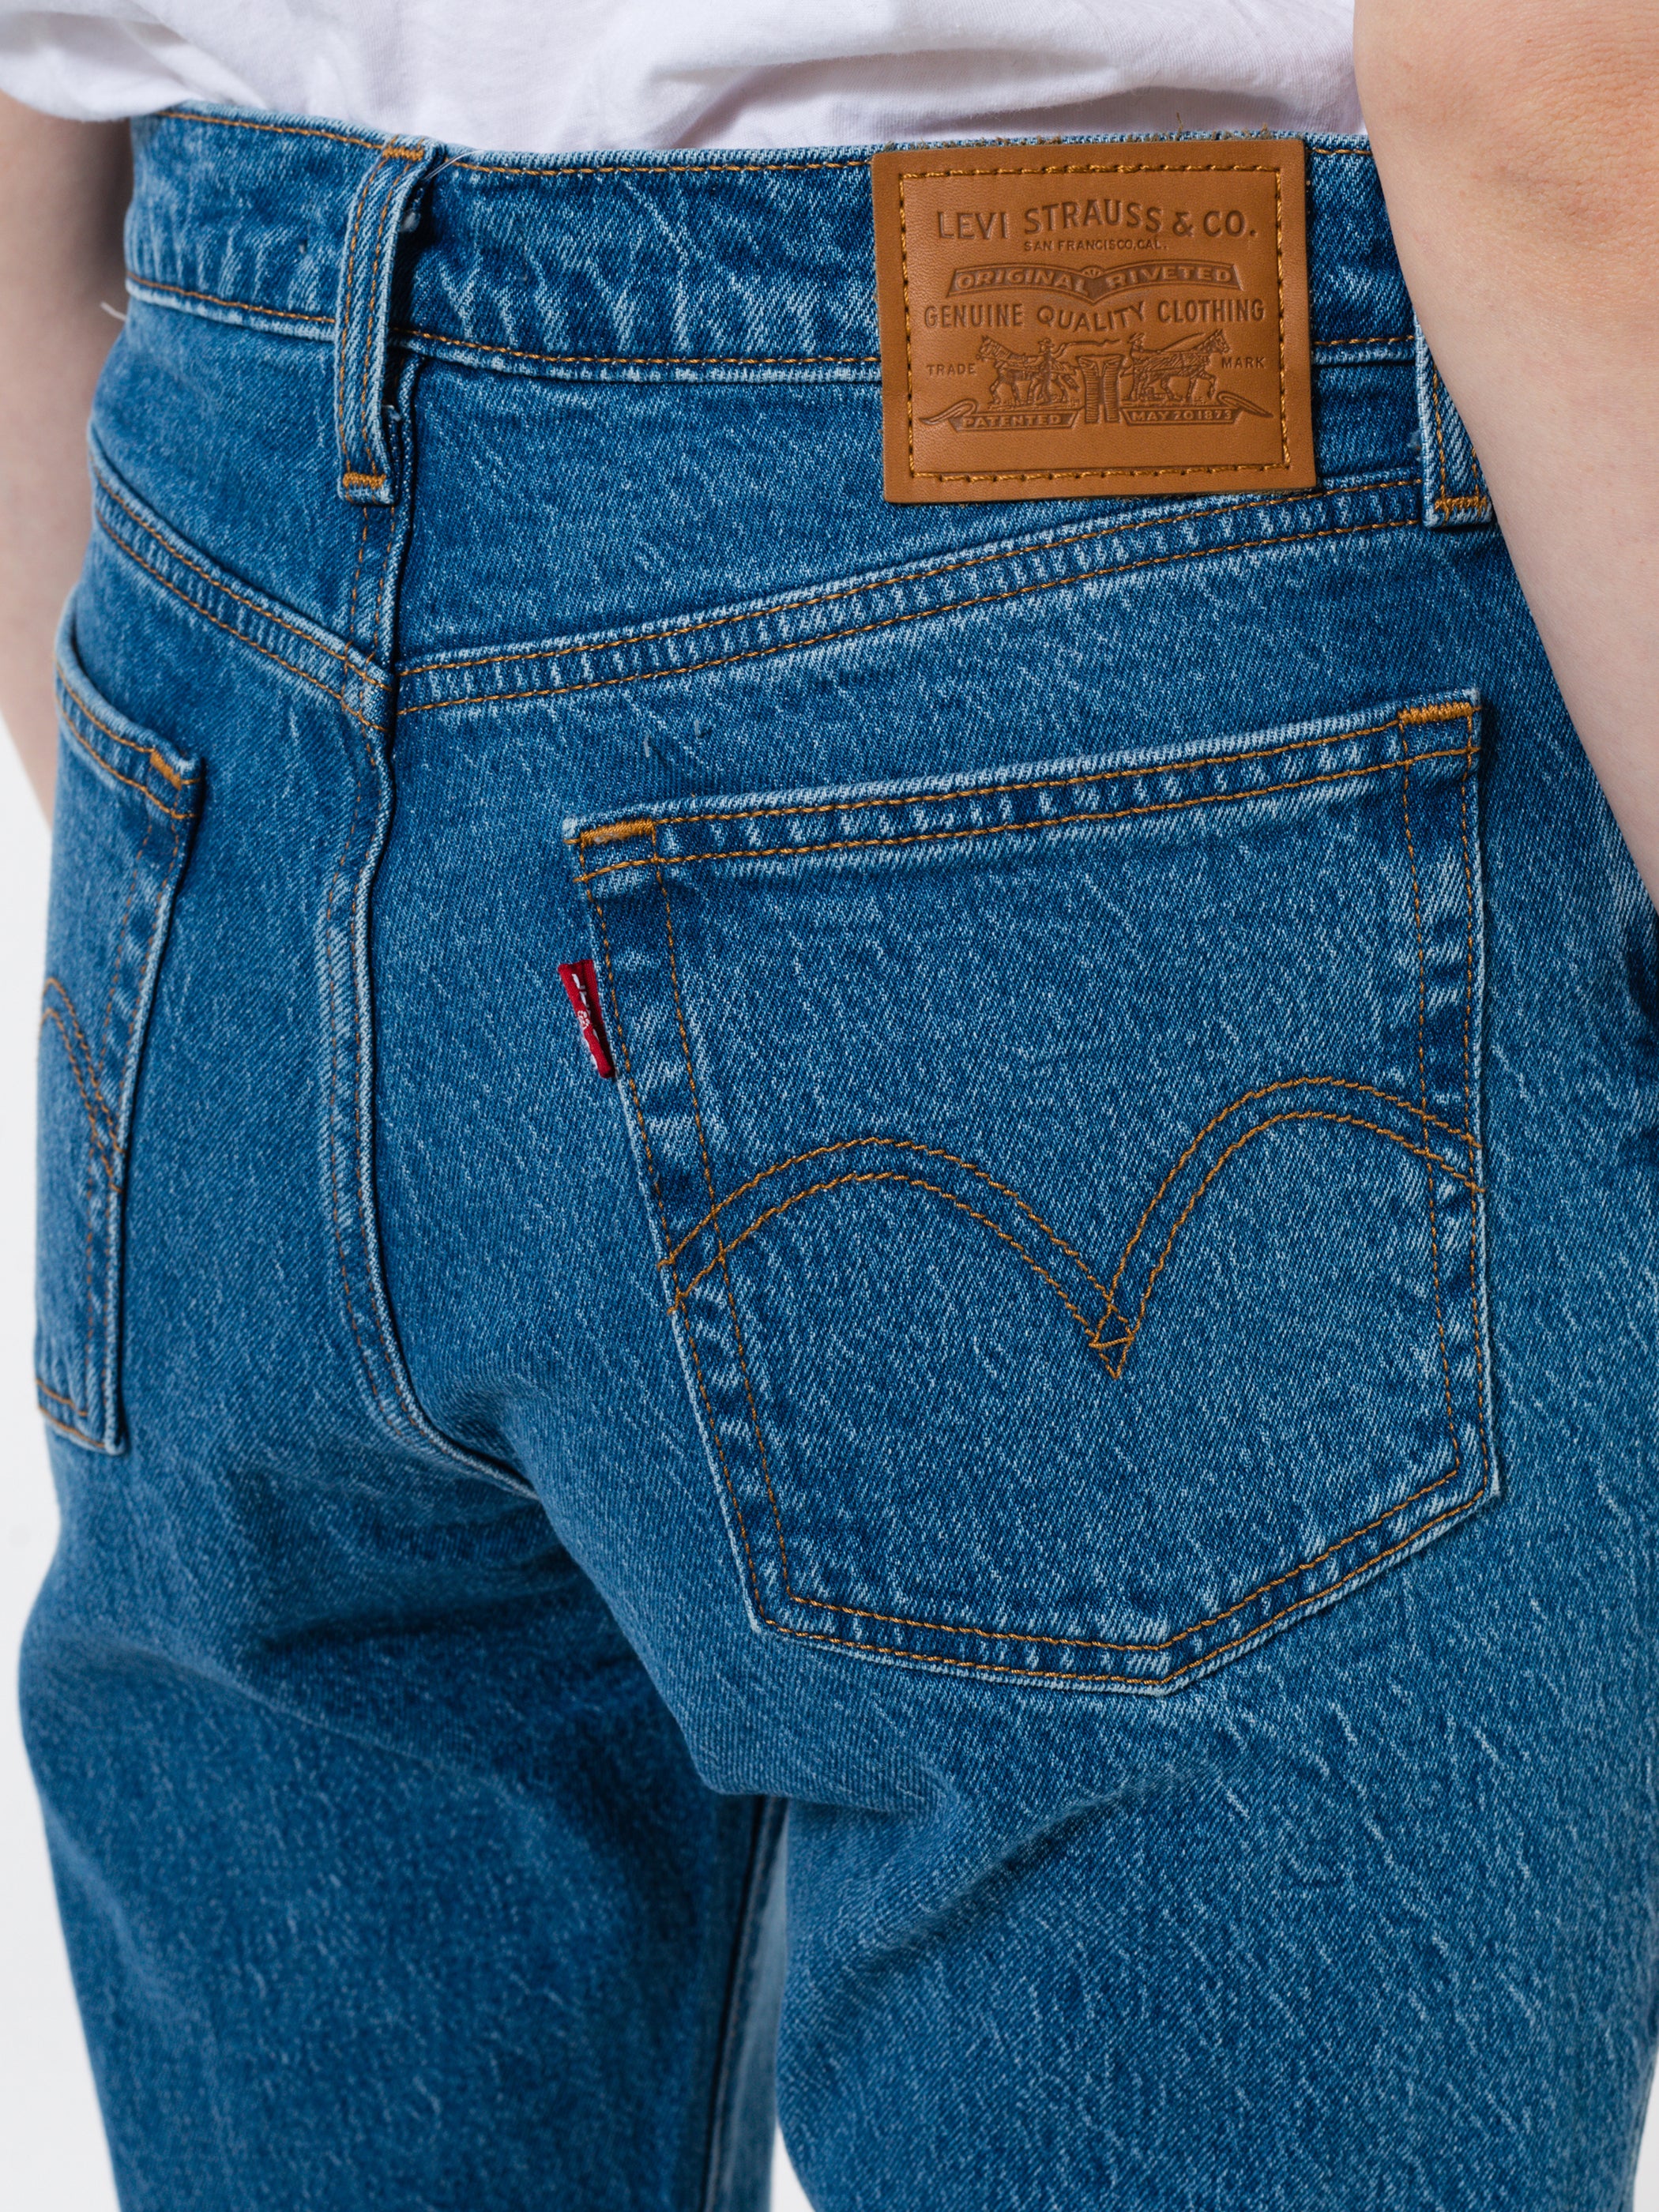 Wedgie Fit Straight Jeans